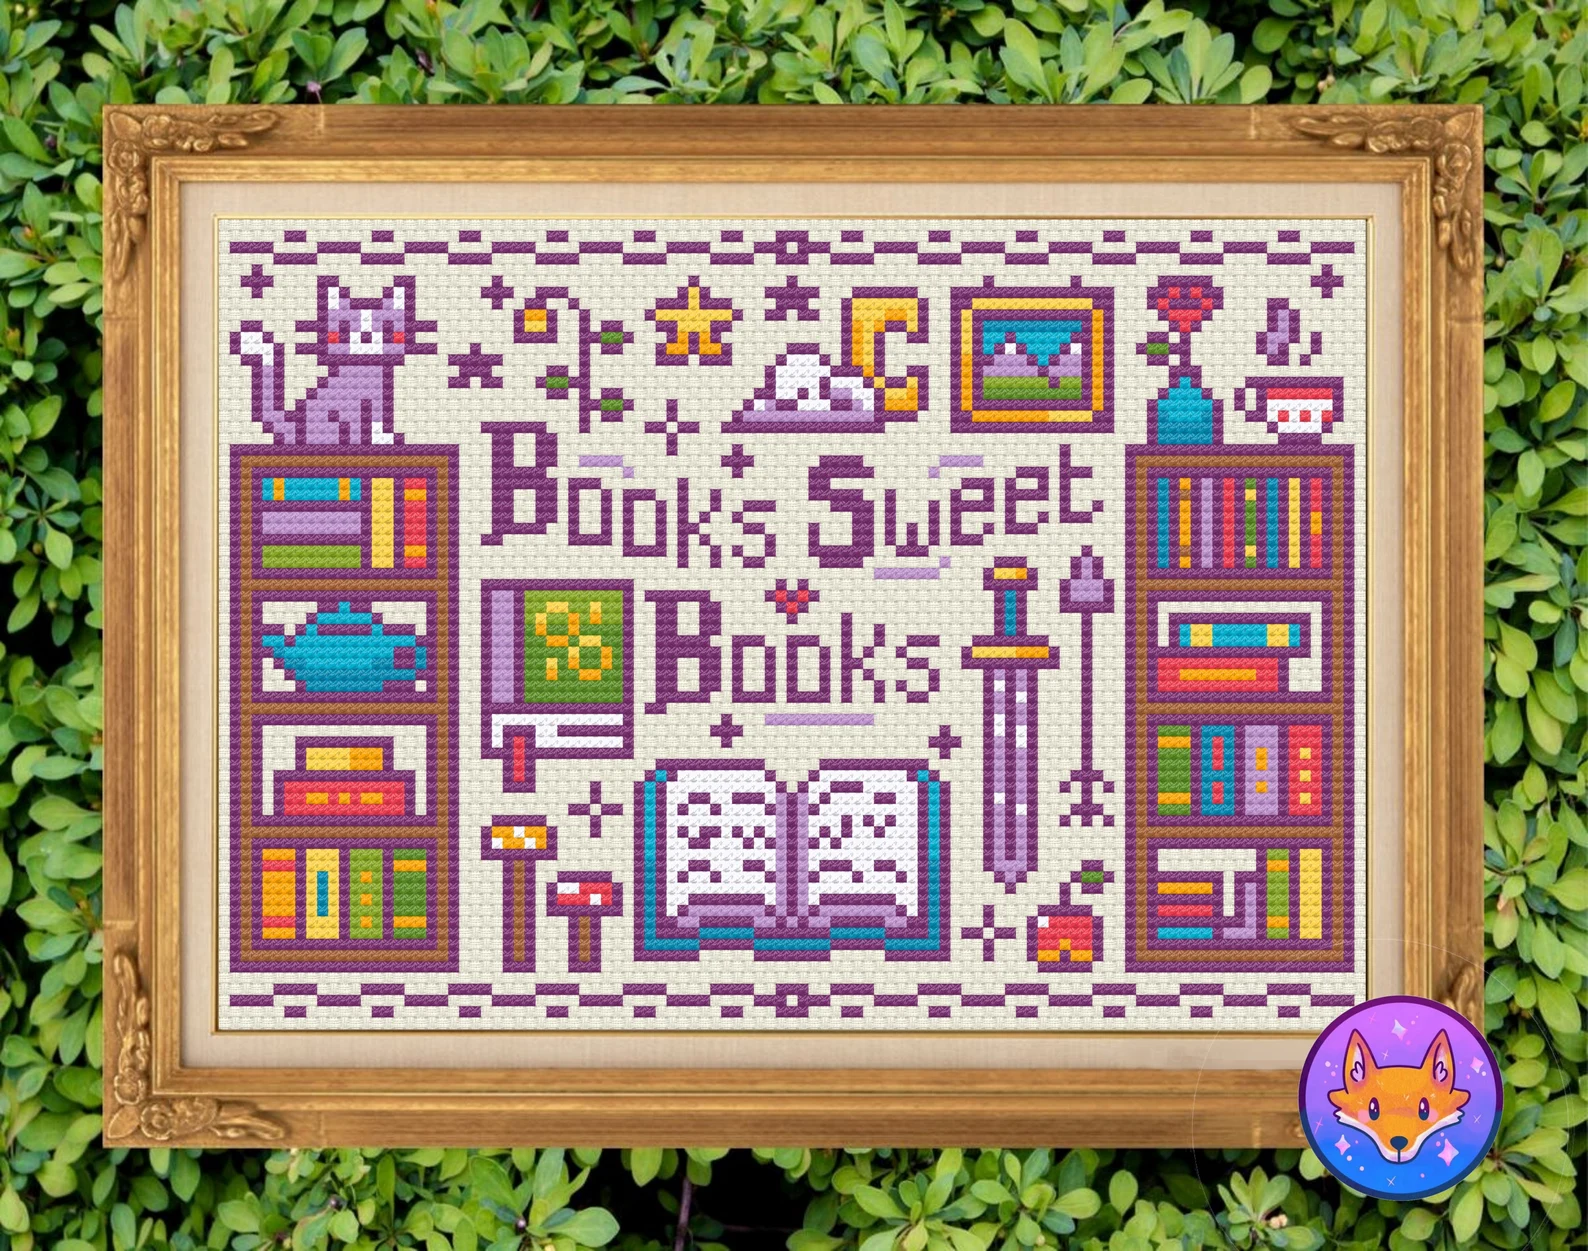 Image of a cross stitch pattern with bookshelves and the words "books sweet books."